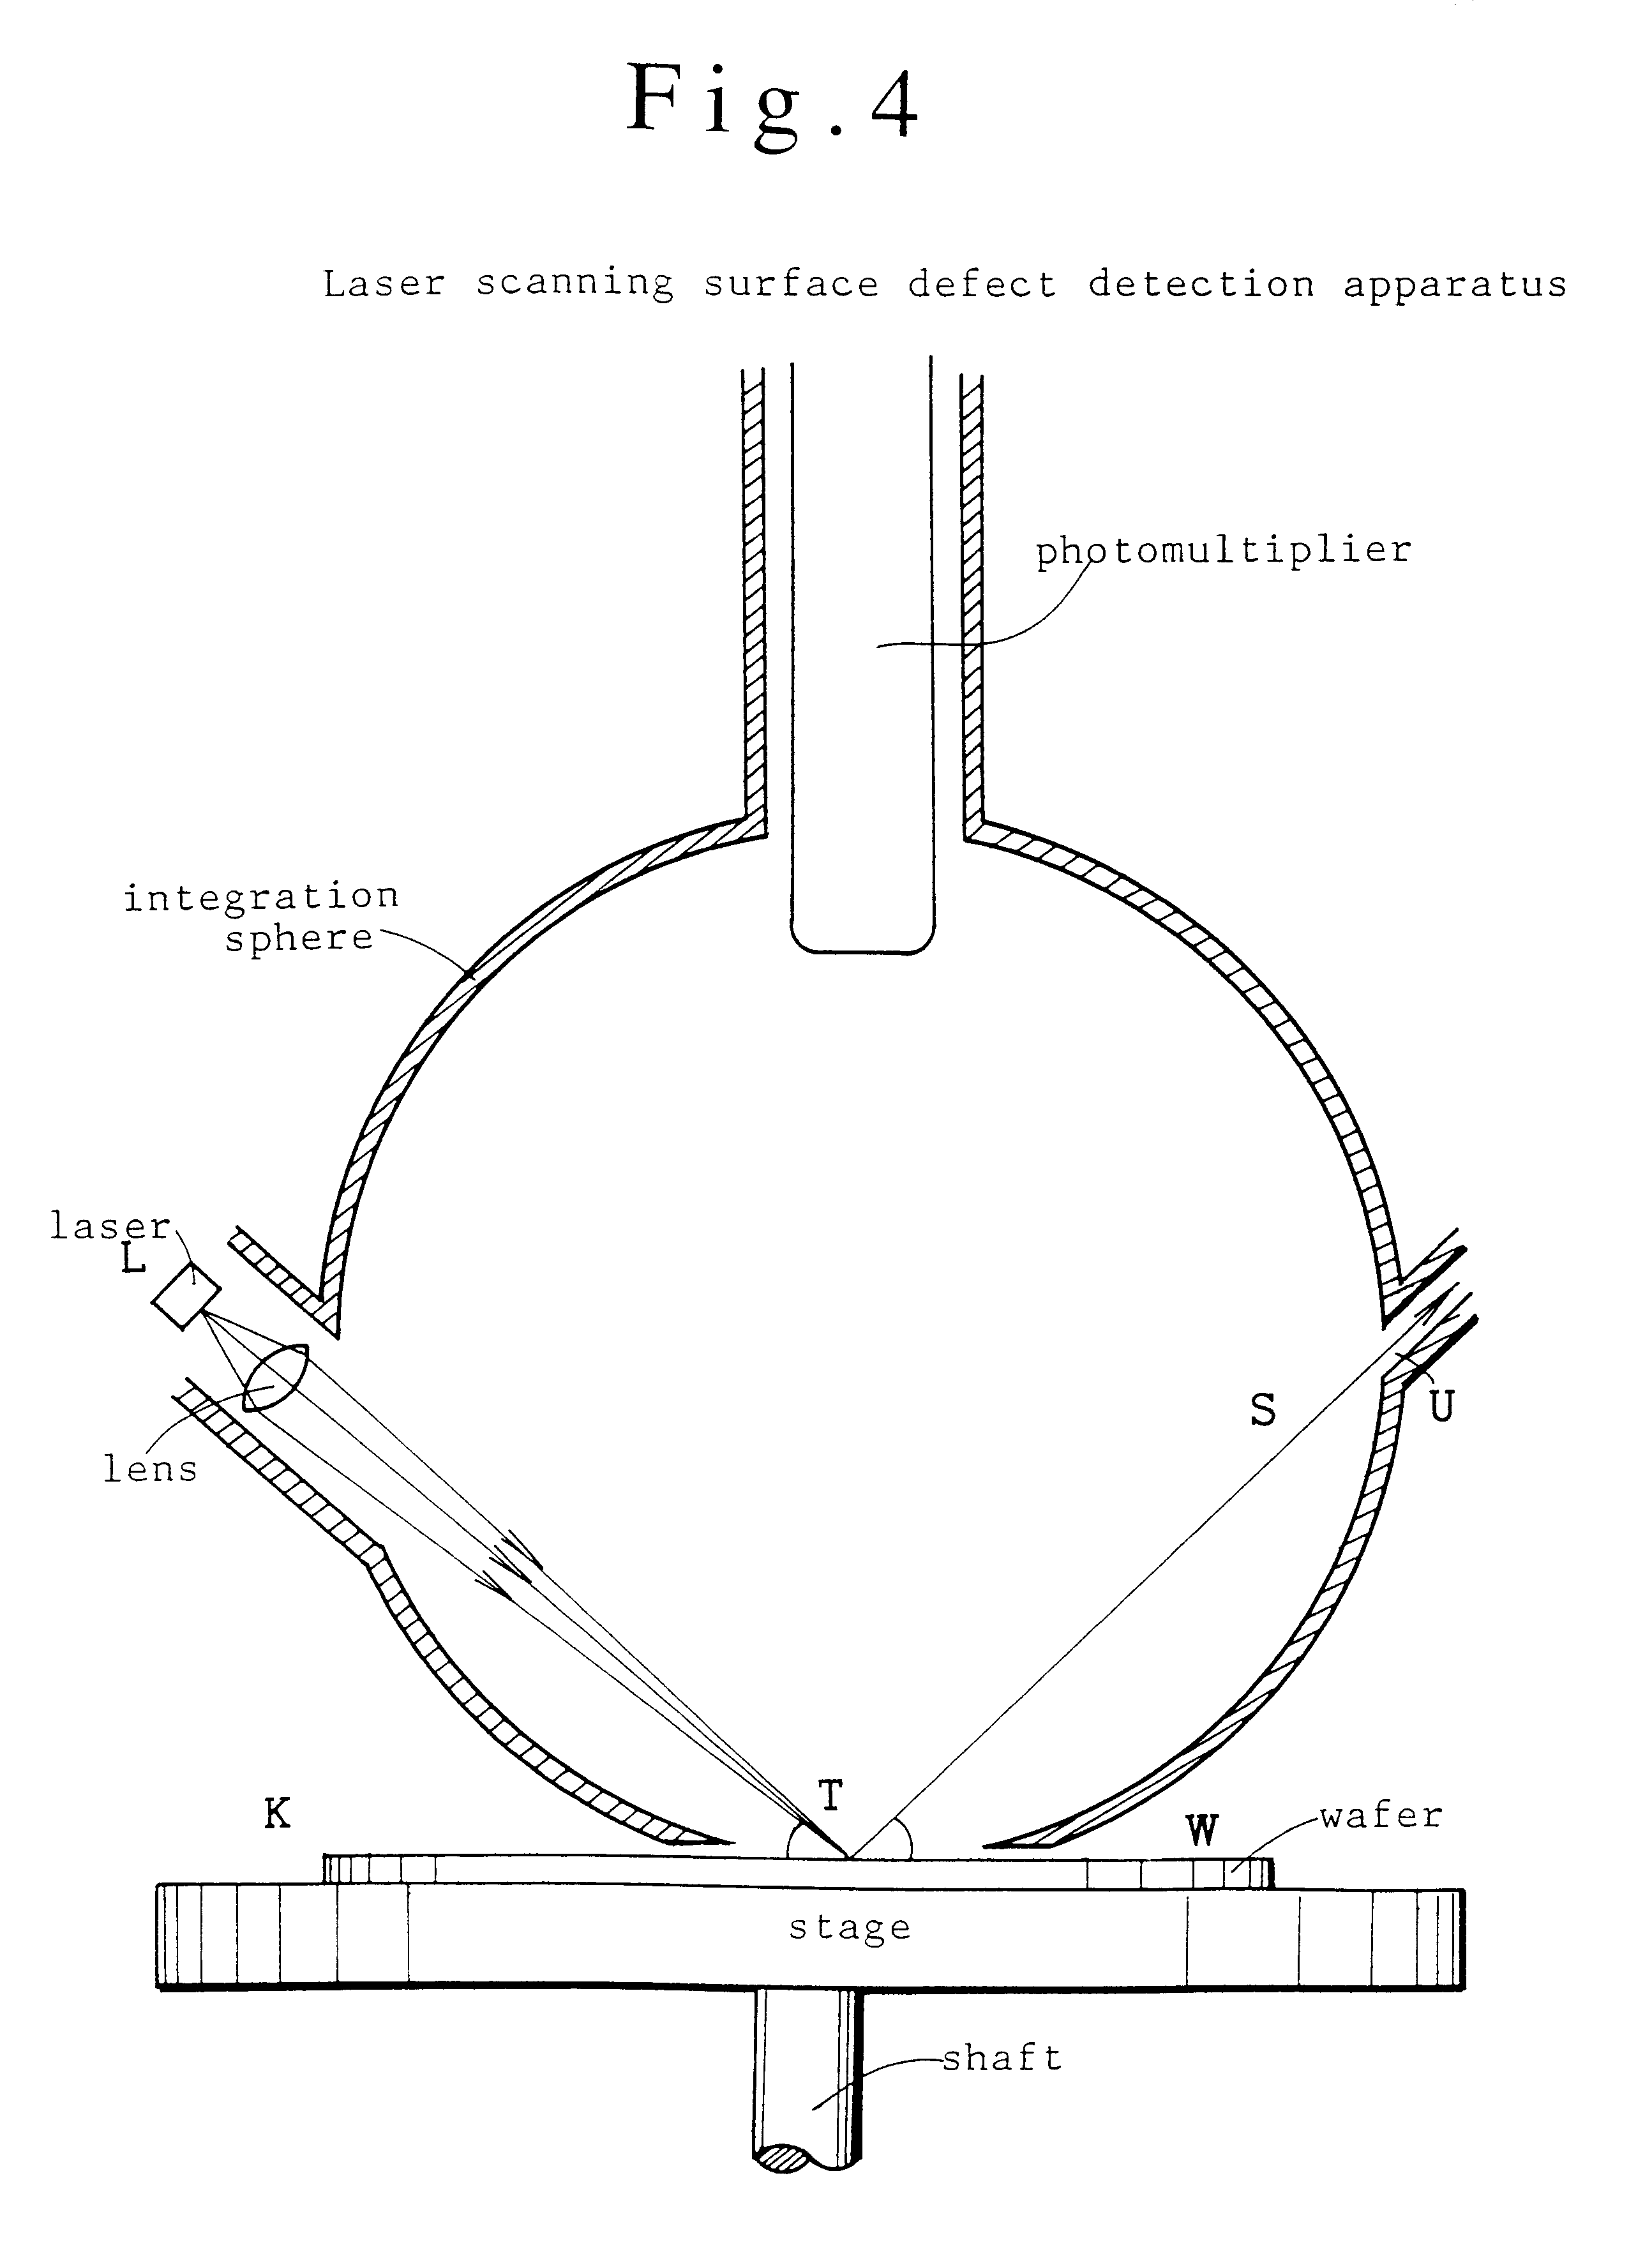 Diamond wafer, method of estimating a diamond wafer and diamond surface acoustic wave device